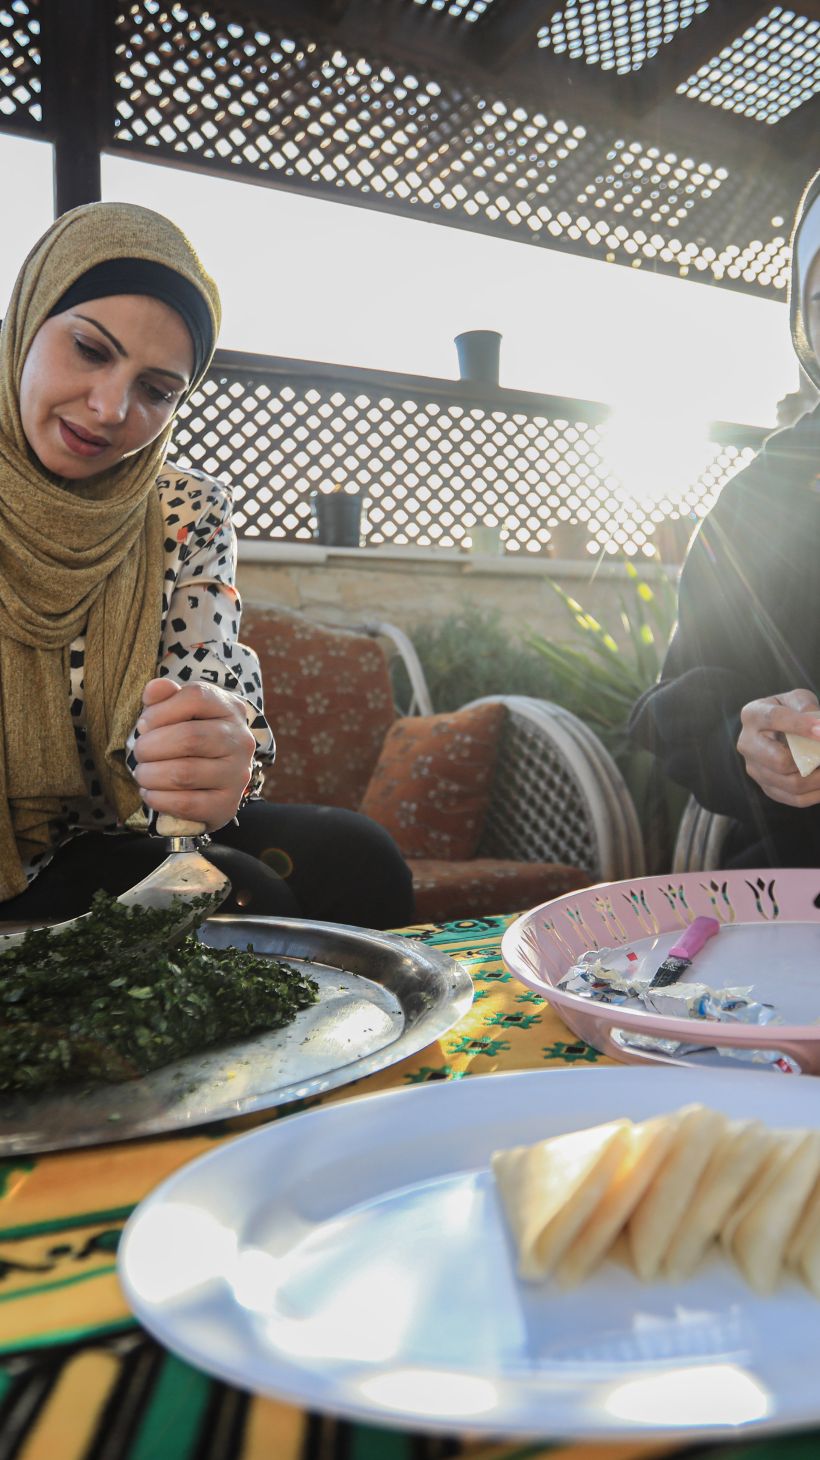 Siham Abu Shaaban and her mother prepare molokia and other iftar dishes